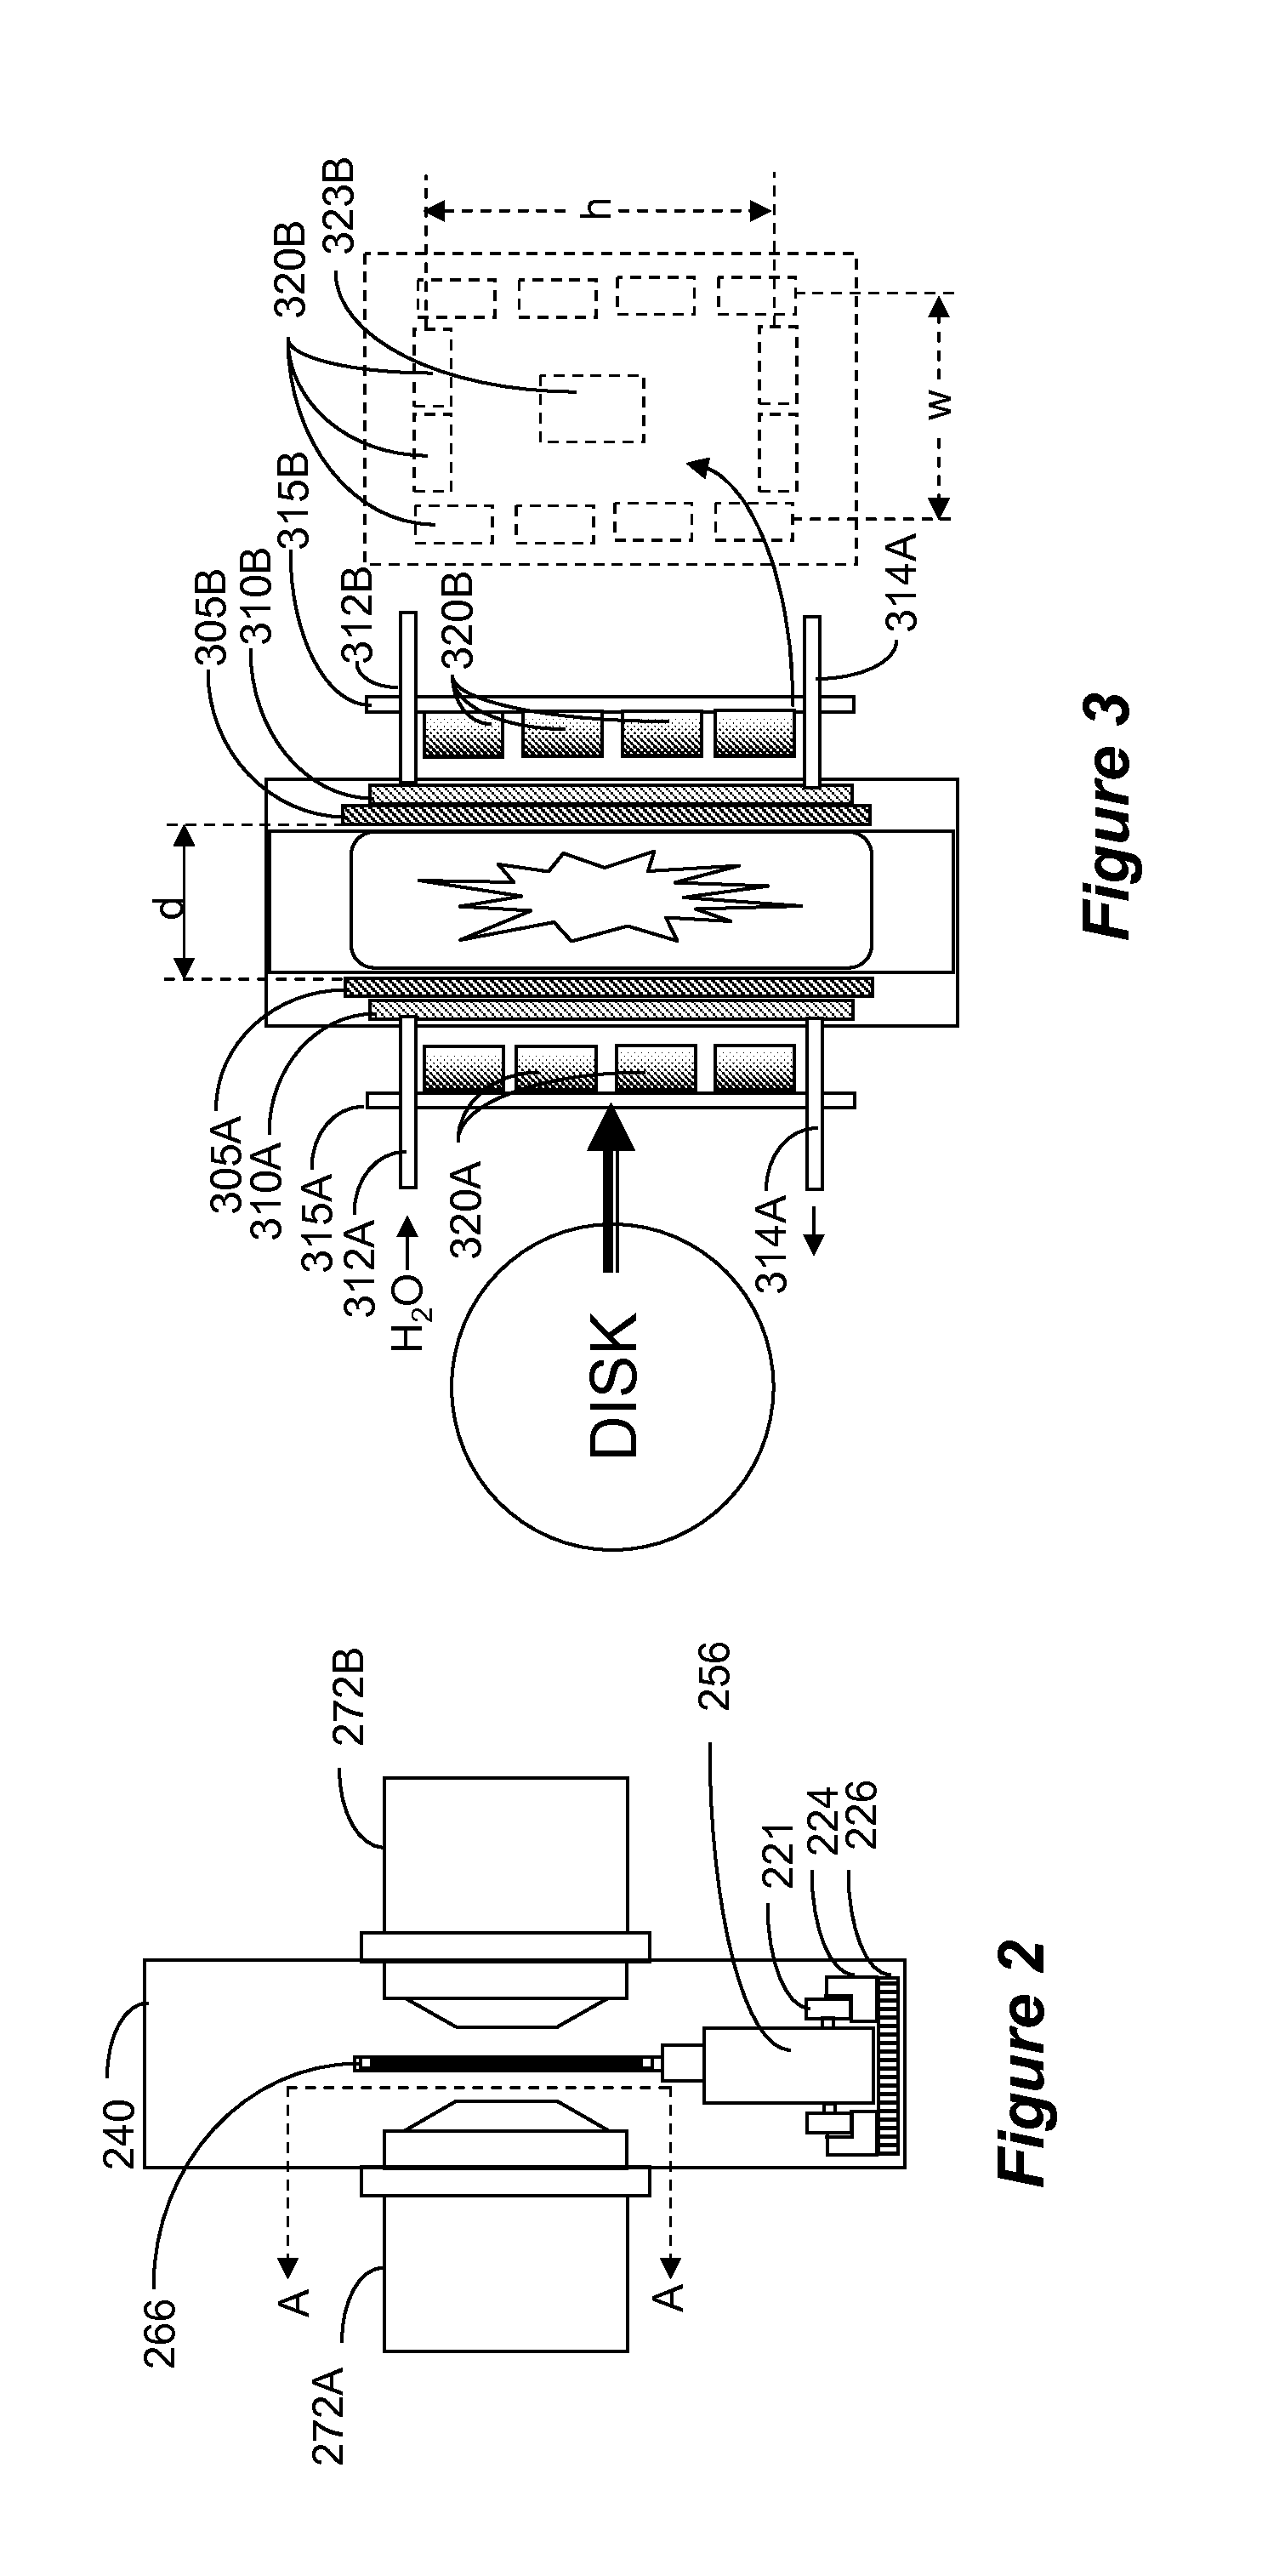 Method and apparatus to produce high density overcoats